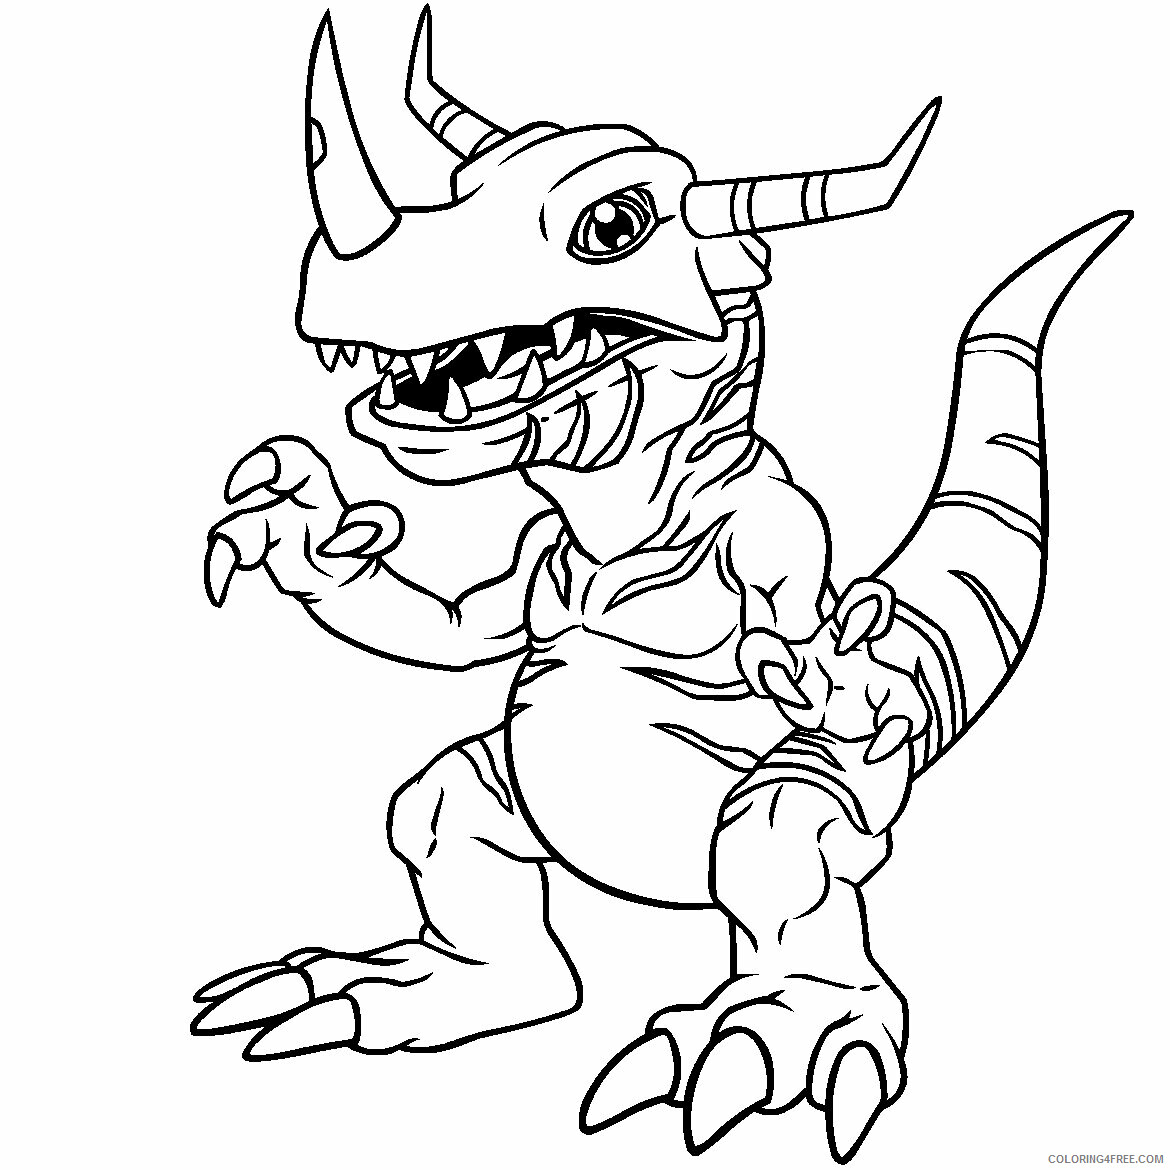 Digimon Printable Coloring Pages Anime digimon hFukG 2 2021 0171 Coloring4free